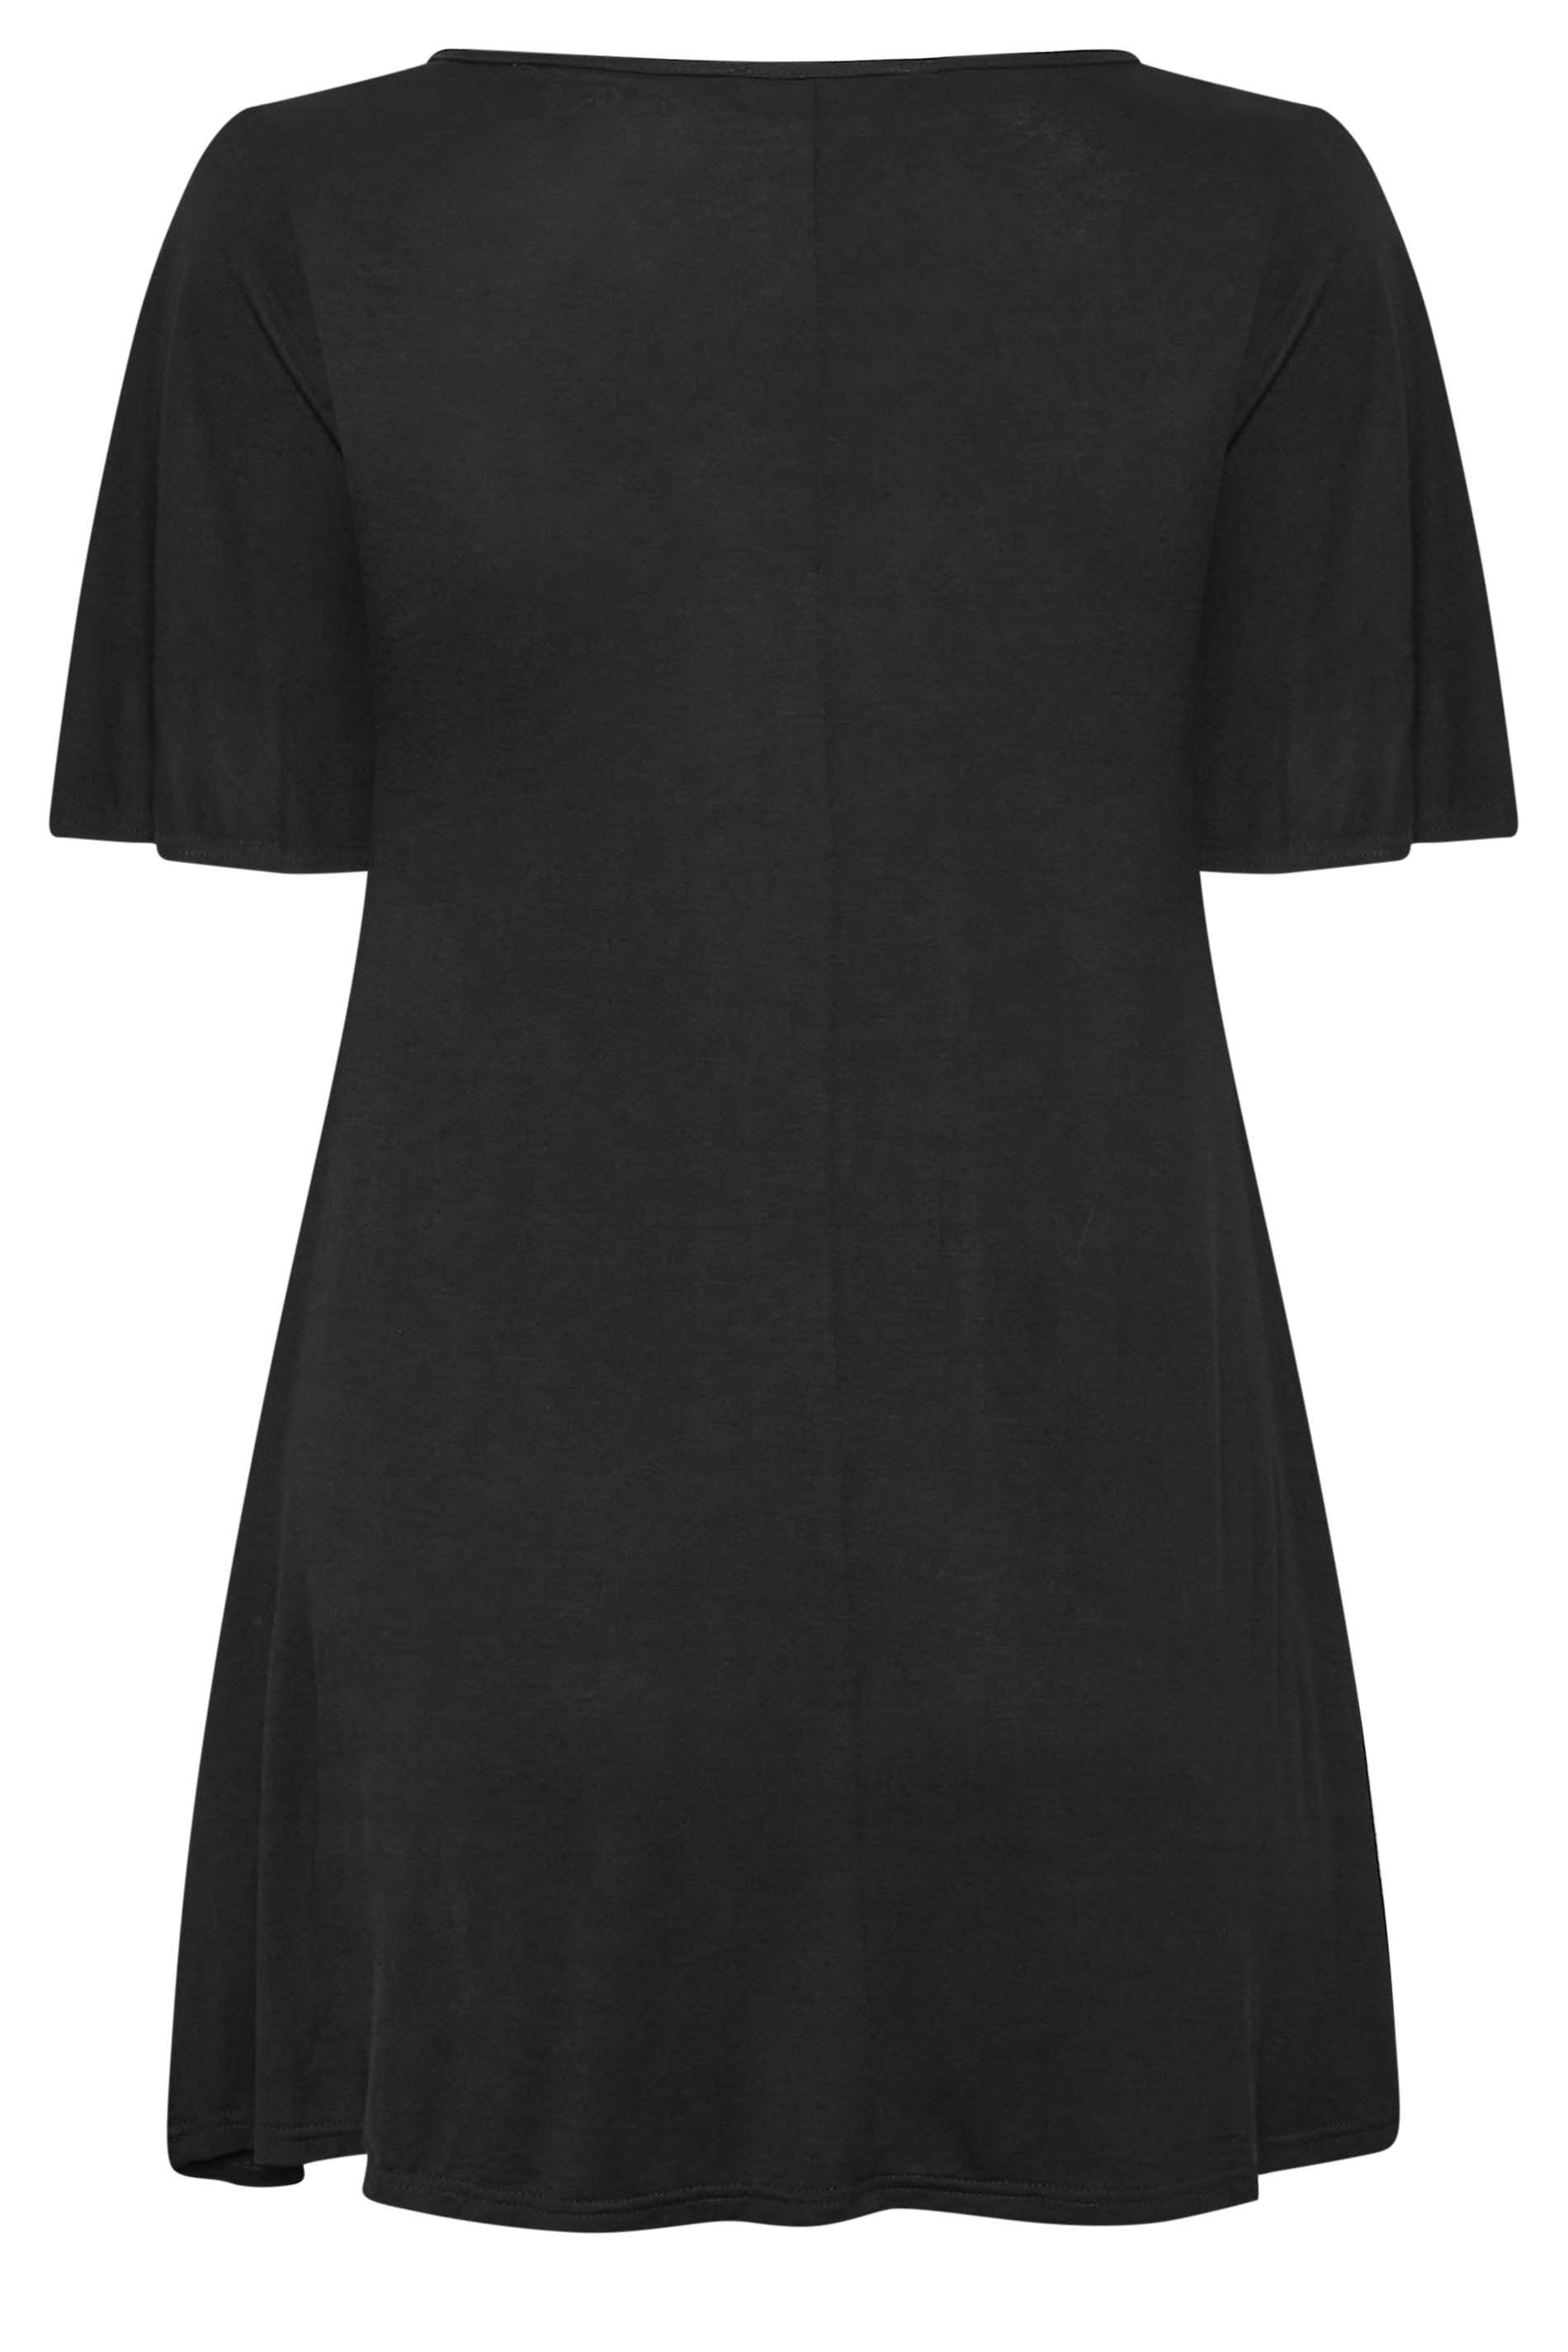 Limited Collection Curve Plus Size Black Tie Neck Top Yours Clothing